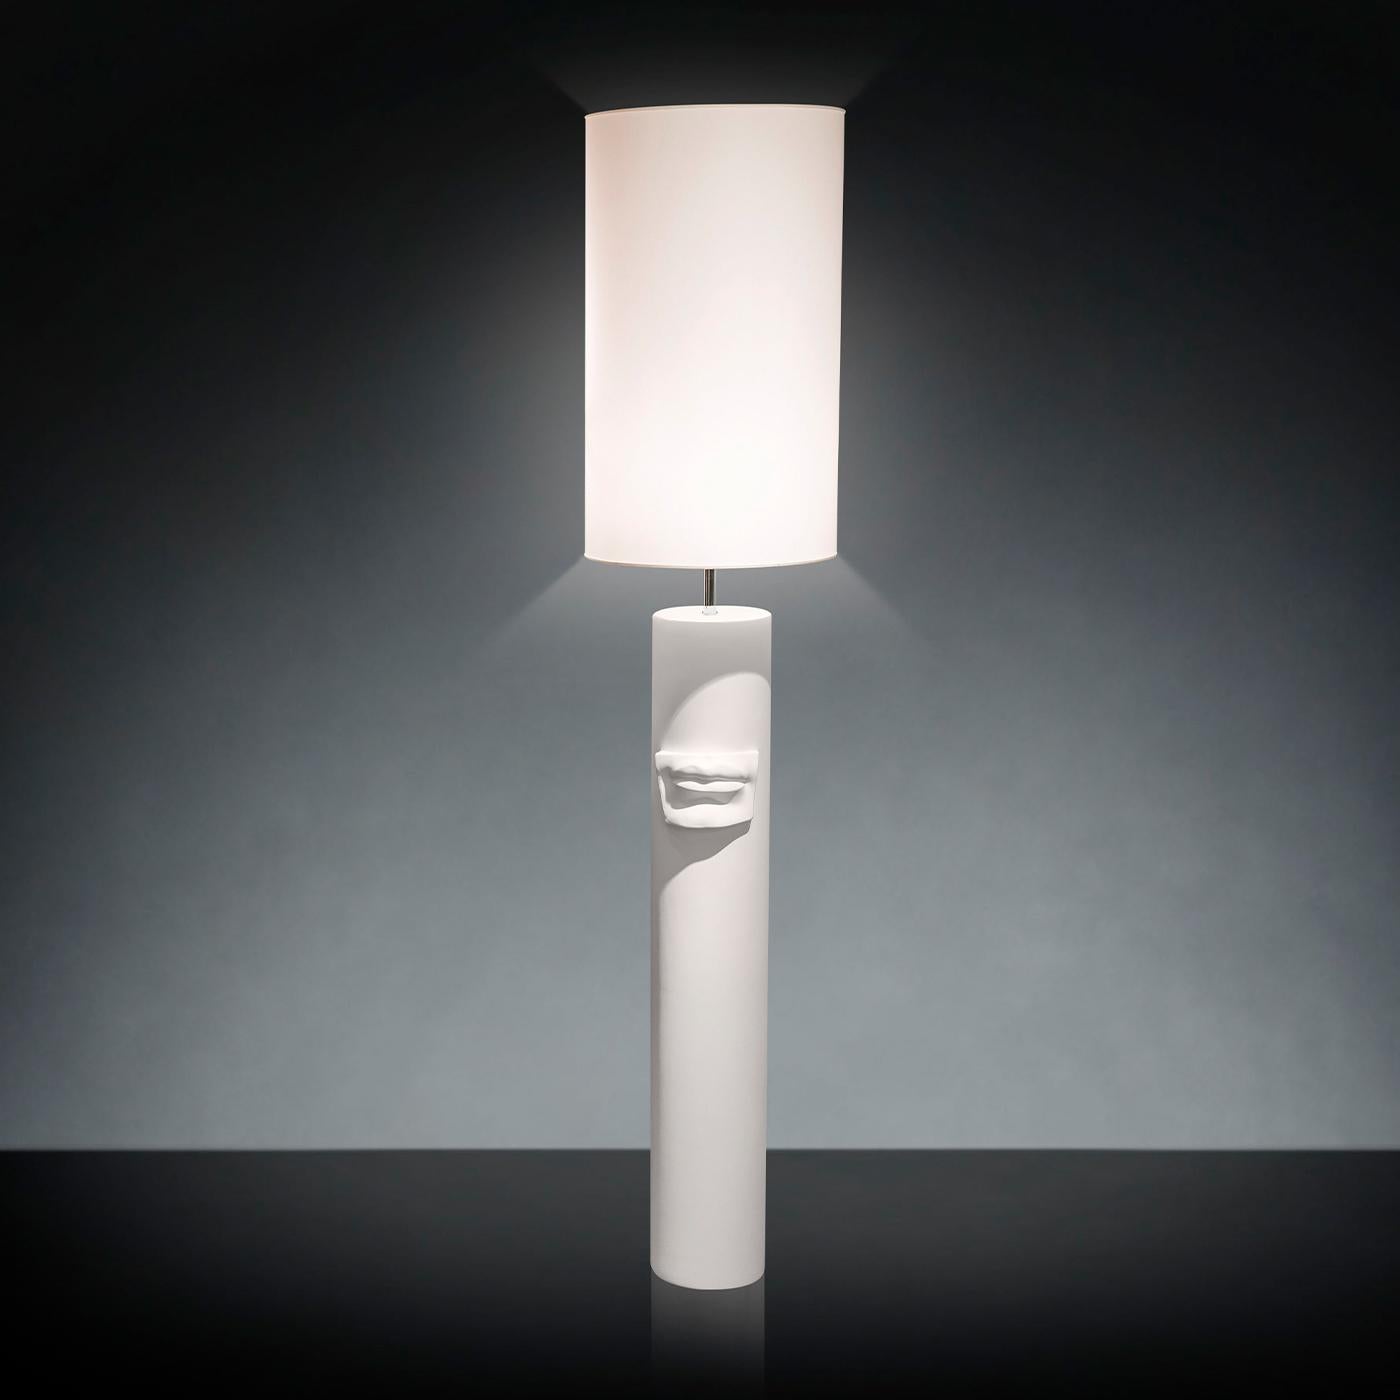 Fashioned entirely of white ceramic, this floor/table lamp pays tribute to Michelangelo's David, whose mouth appears in low relief on the sensuously sculptured cylindrical base. The lampshade softens the illumination provided by an E27 max 50W bulb,